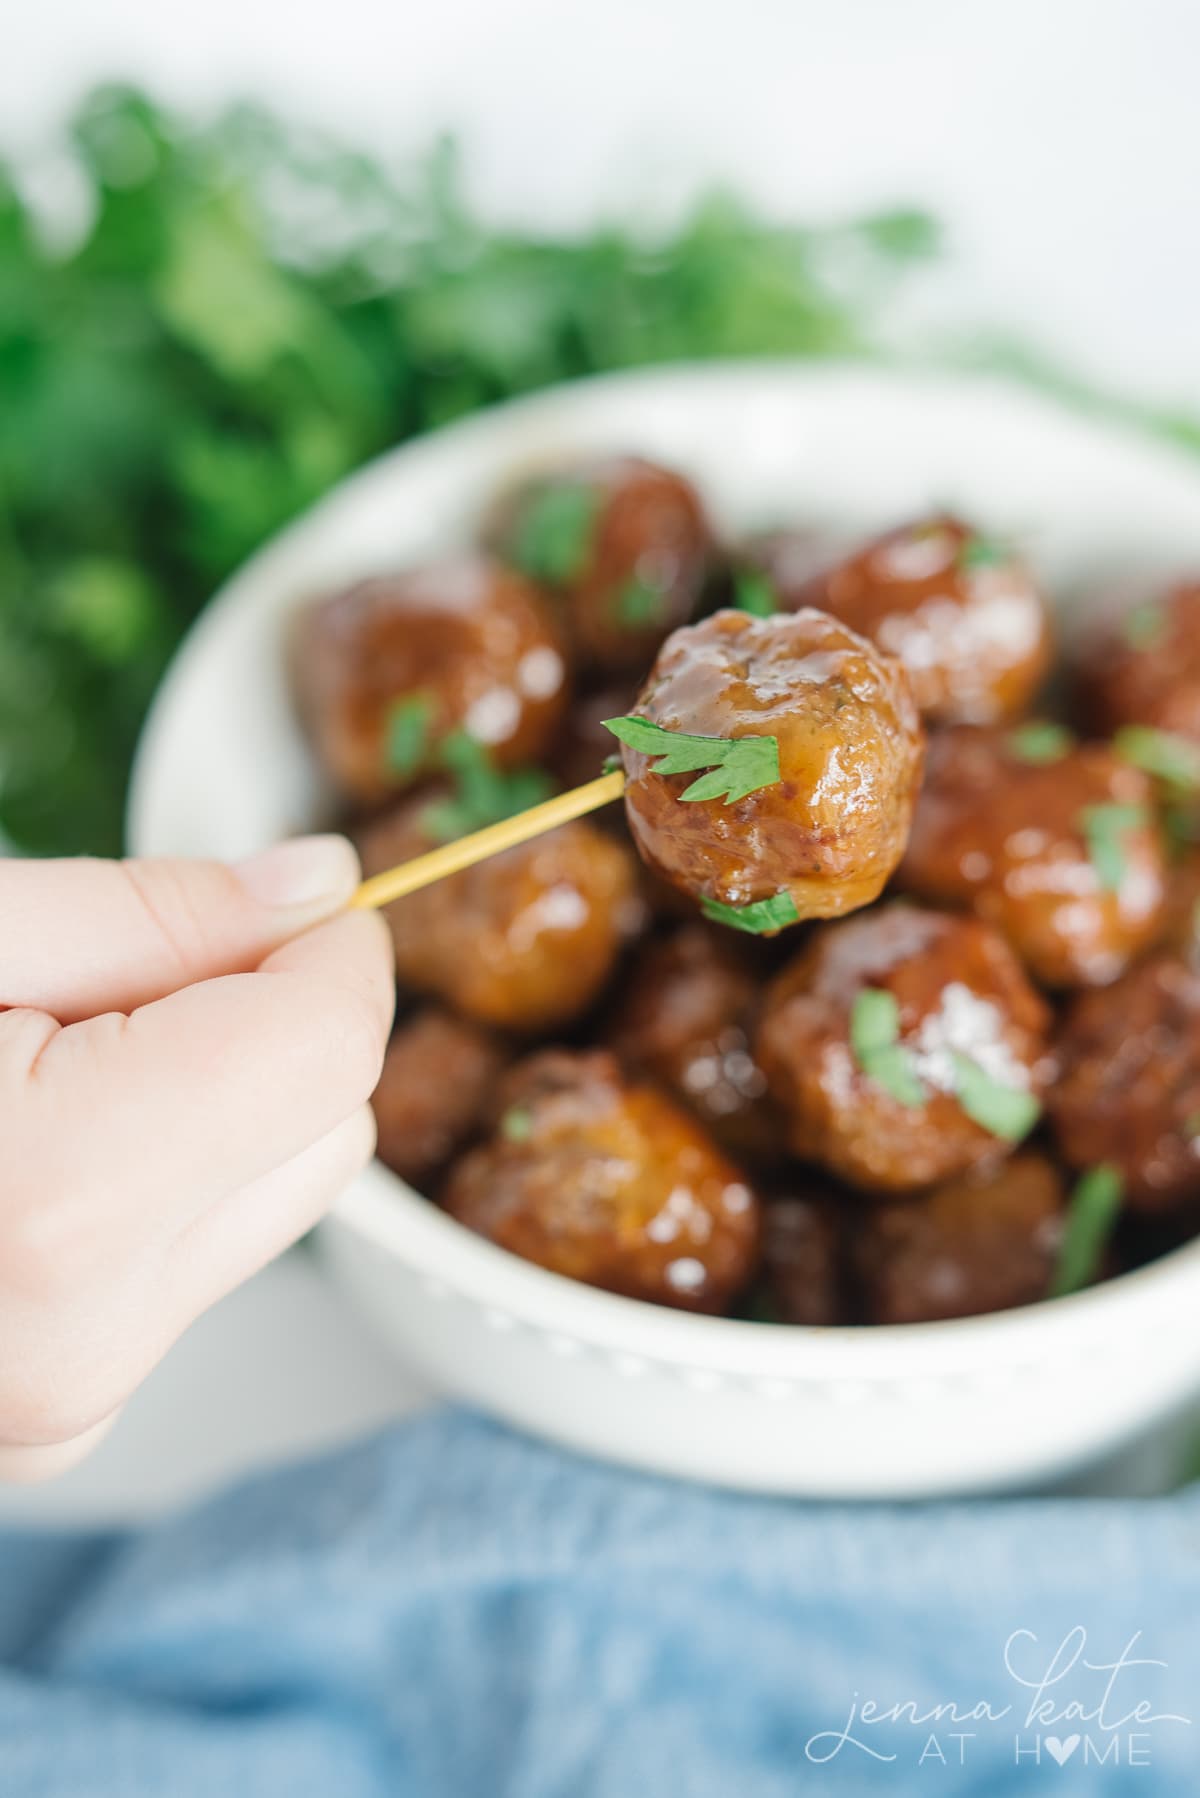 Meatball on a toothpick, easy party appetizers cooked in the crockpot